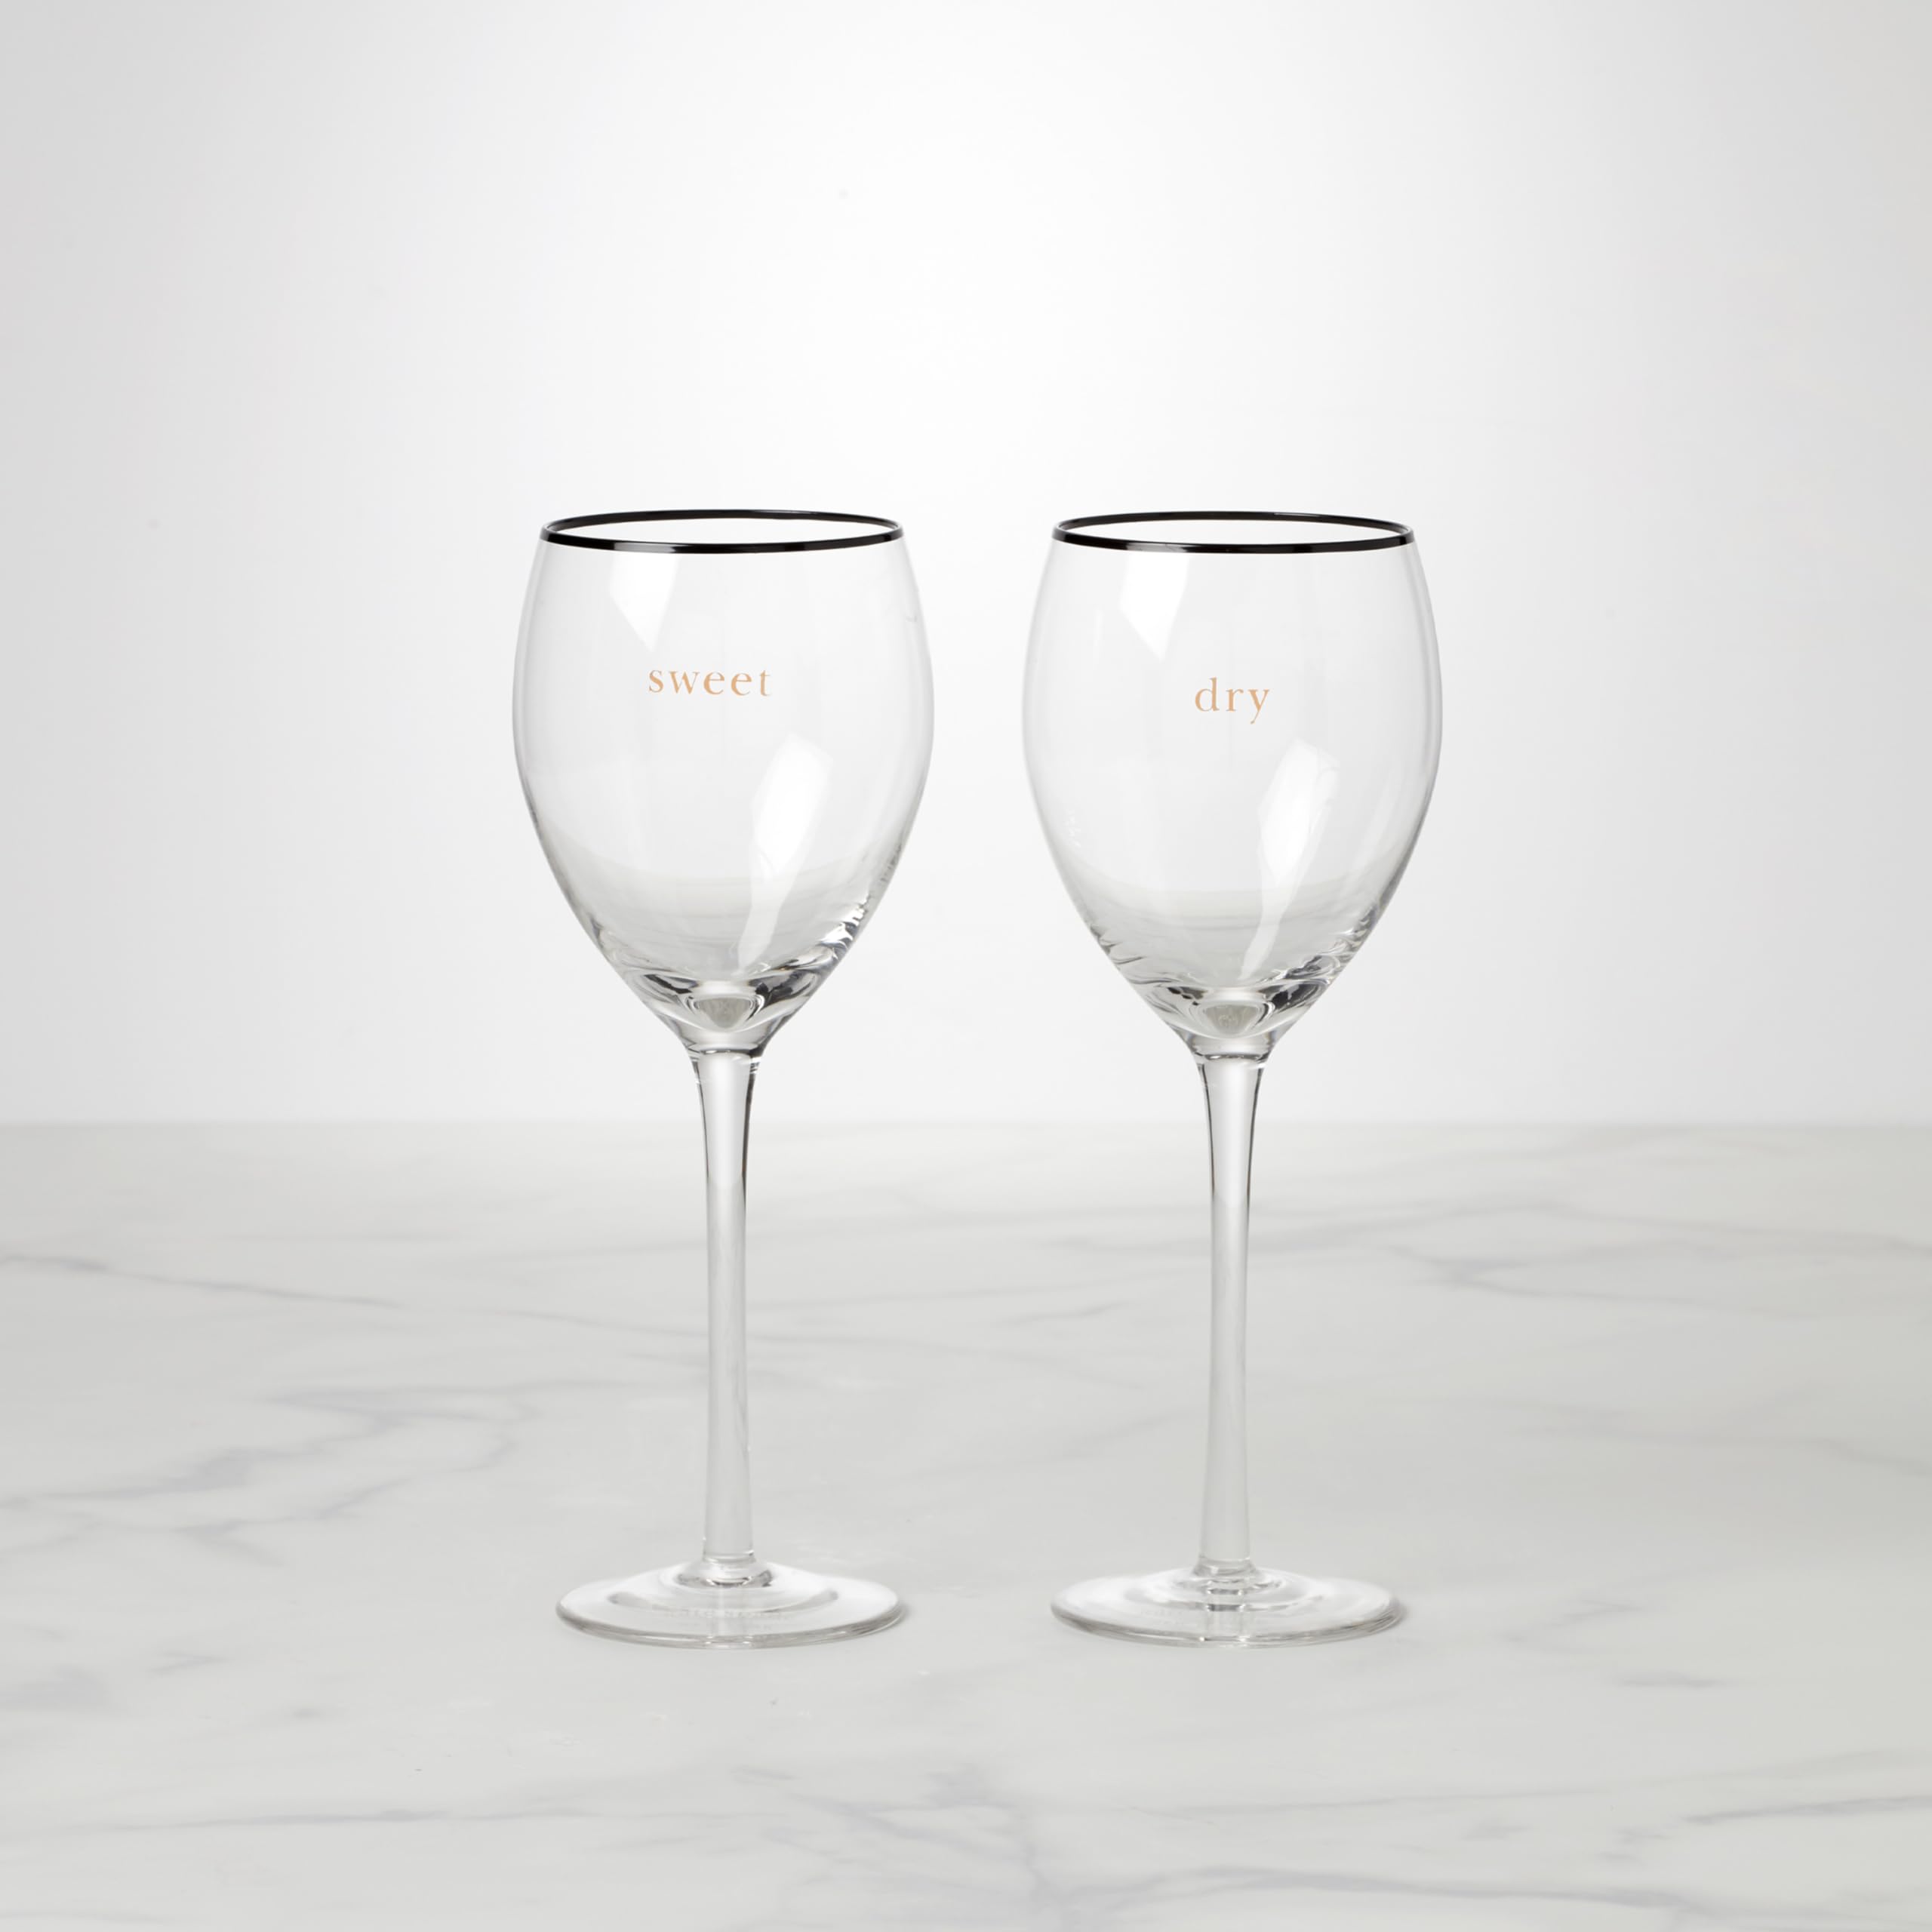 Kate Spade New York Cheers to Us Sweet & Dry Wine Glasses, Set of 2, 0.88, Clear